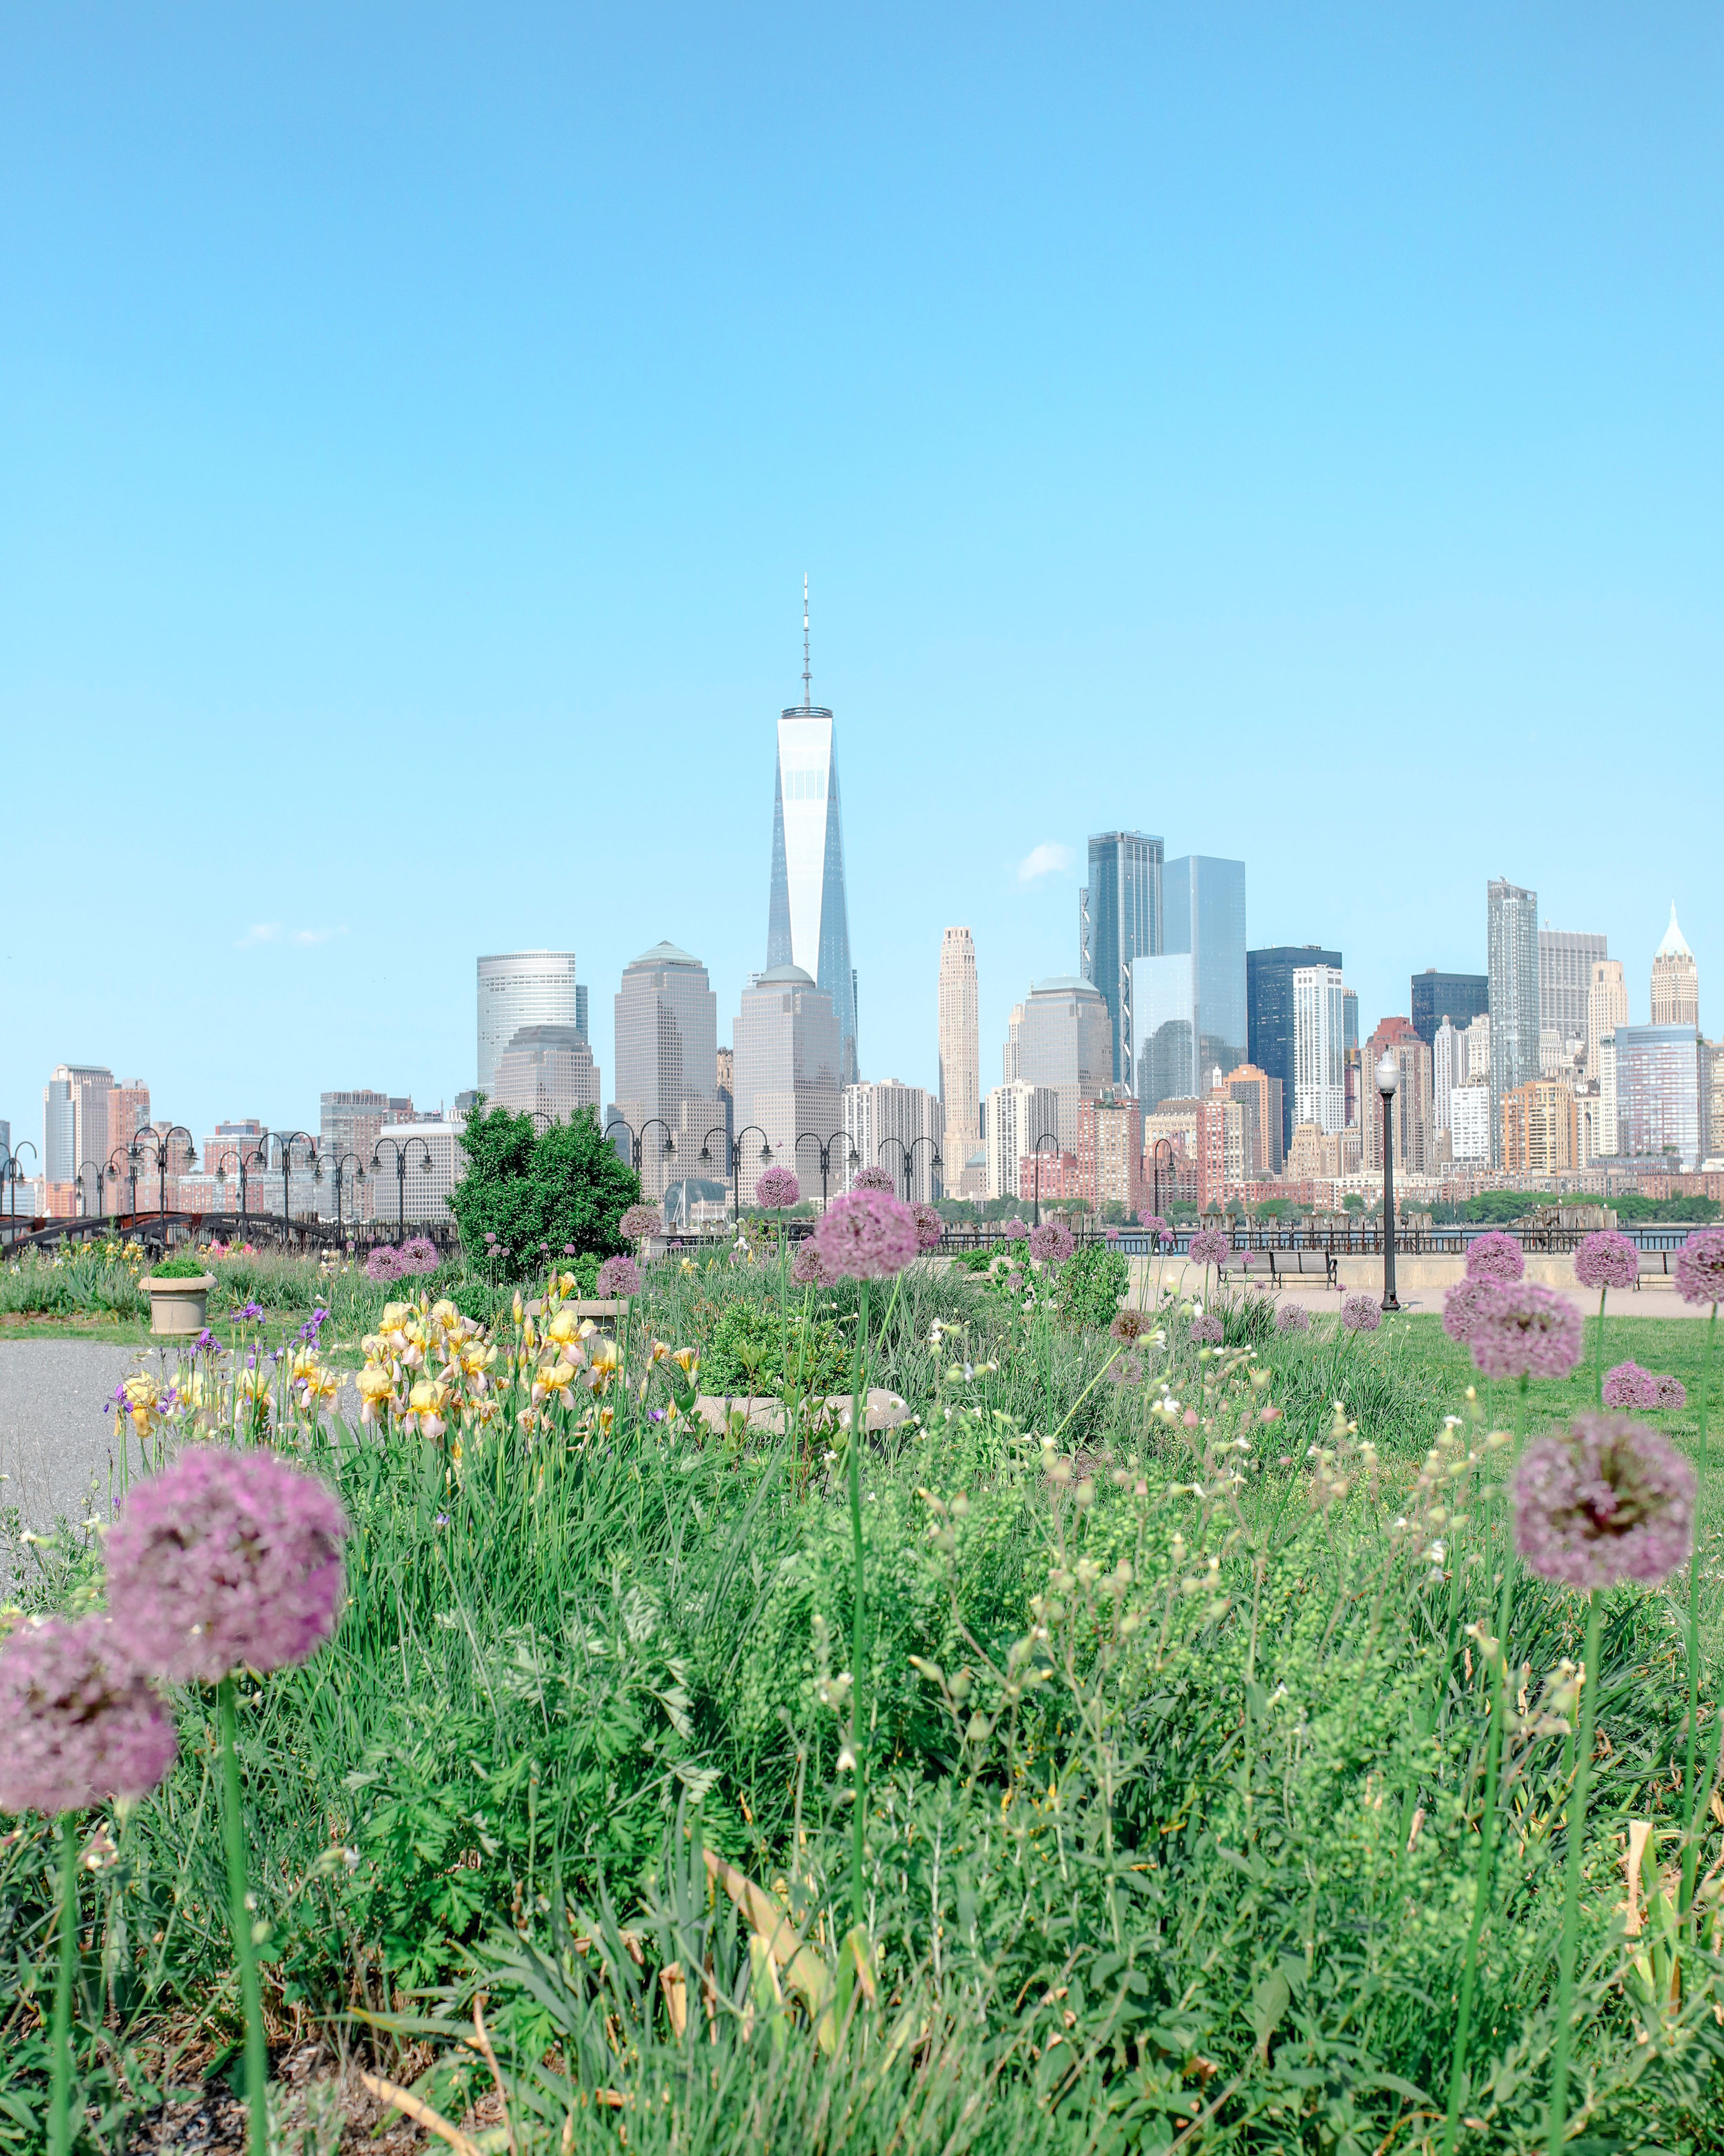 Flowers and the Freedom Tower